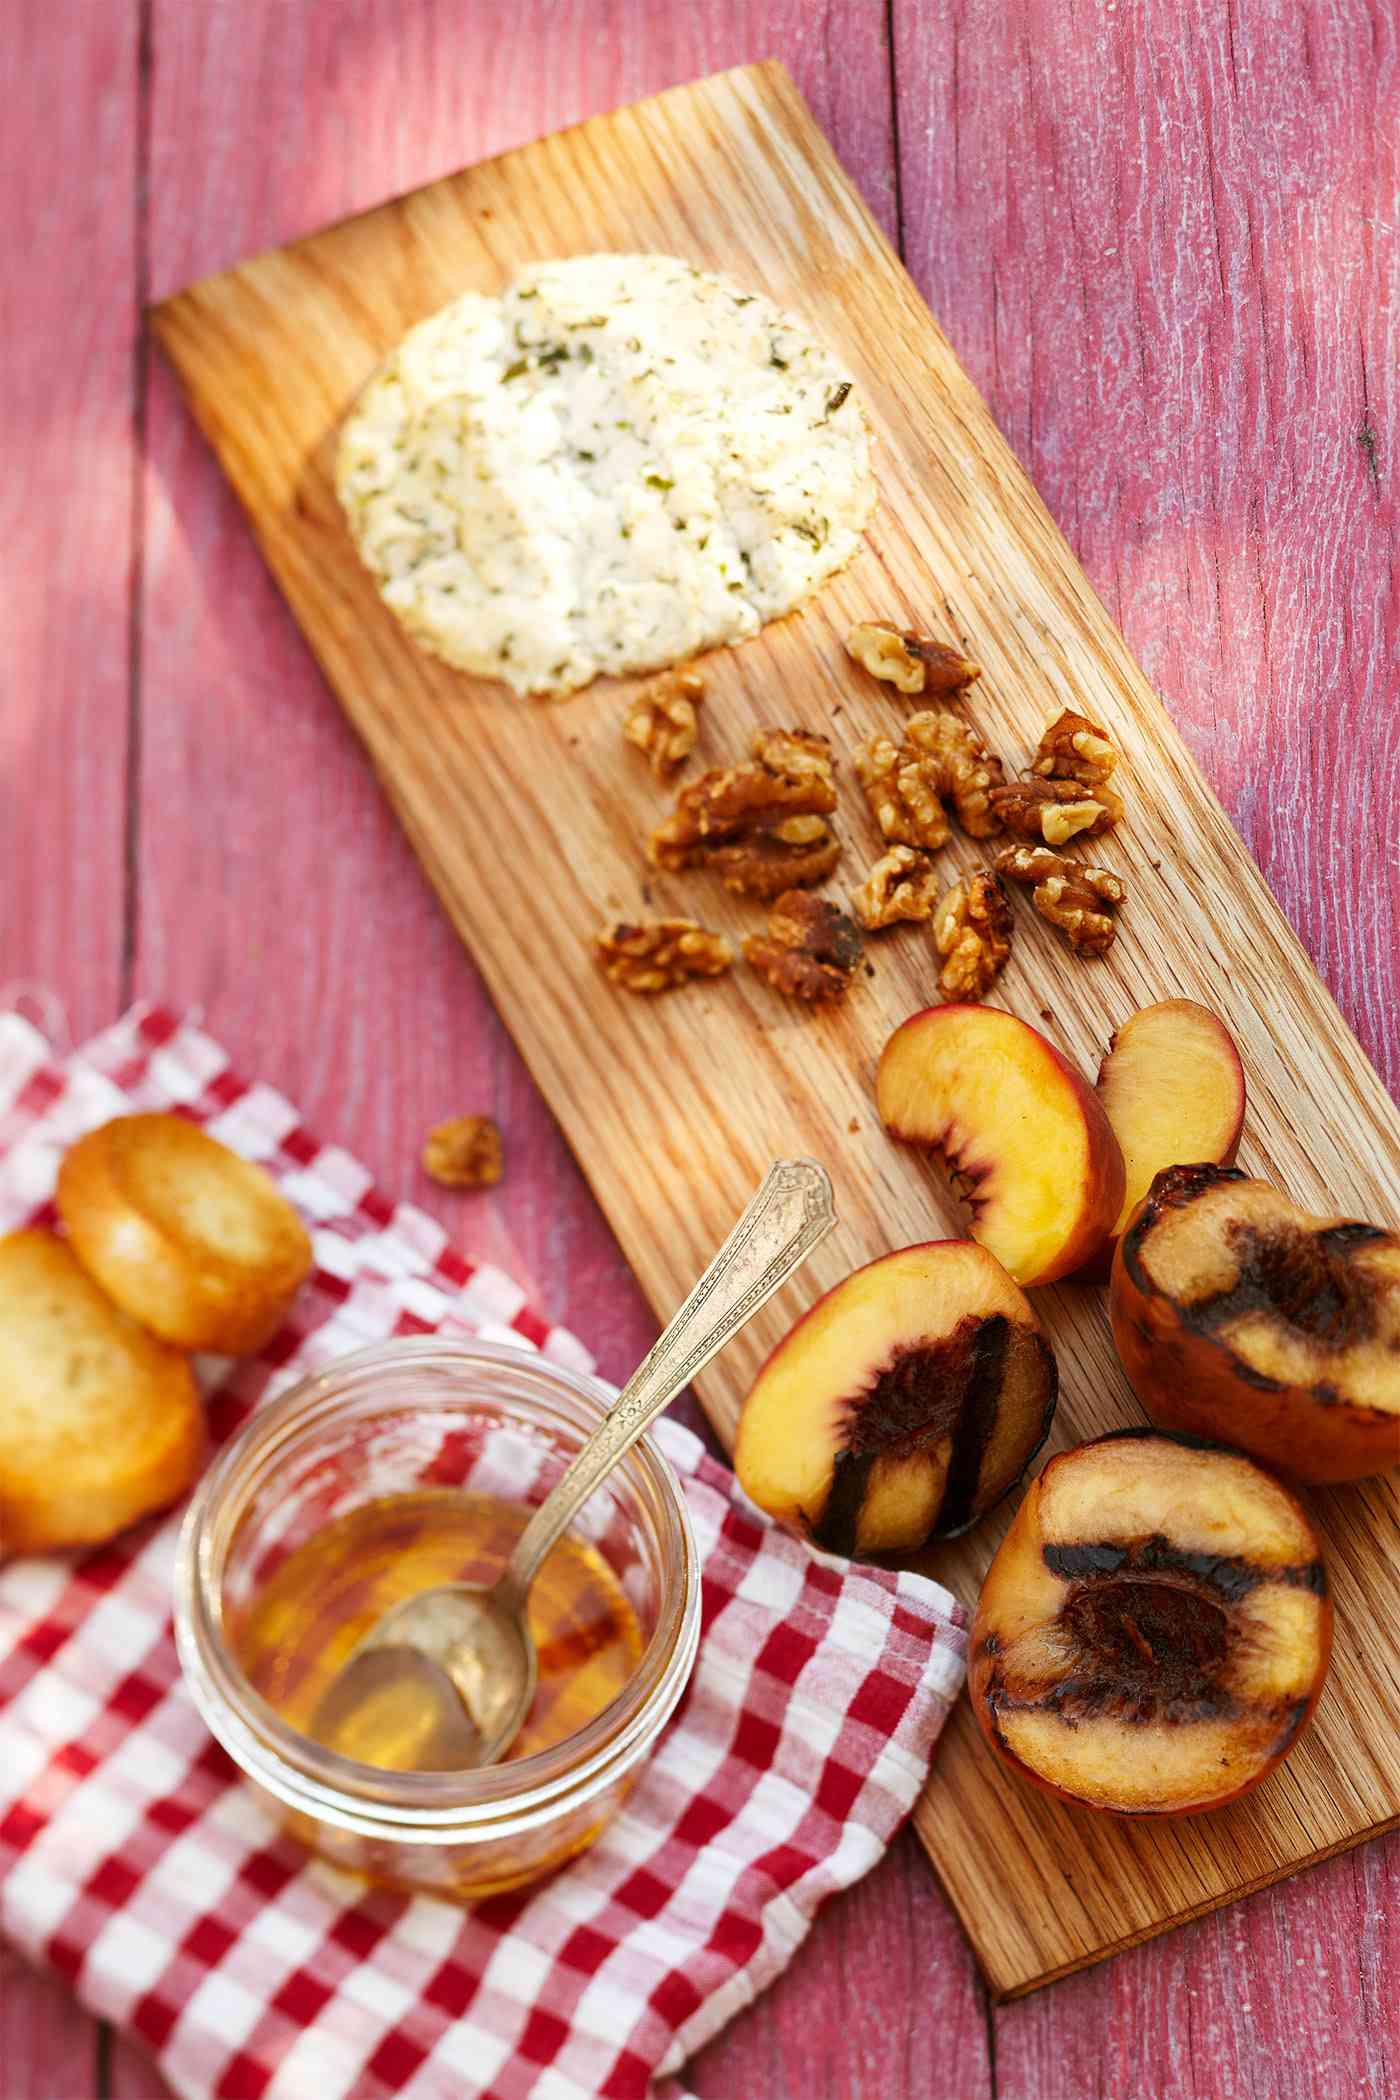 Plank-Smoked Peaches and Goat Cheese